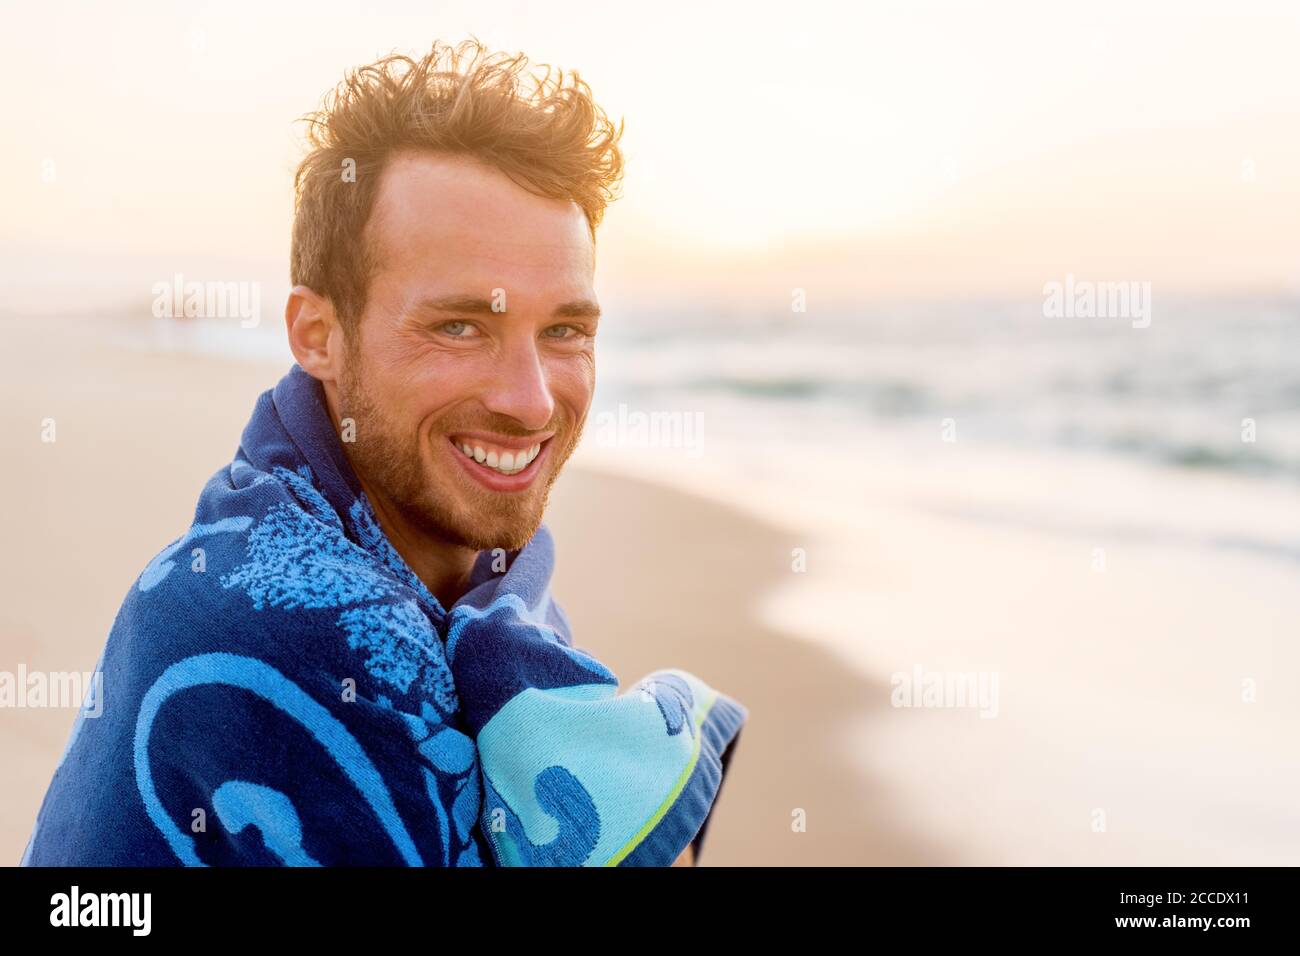 Smiling handsome young man beauty portrait on beach at sunset looking at camera laughing, healthy grin face of happy model in towel. Stock Photo